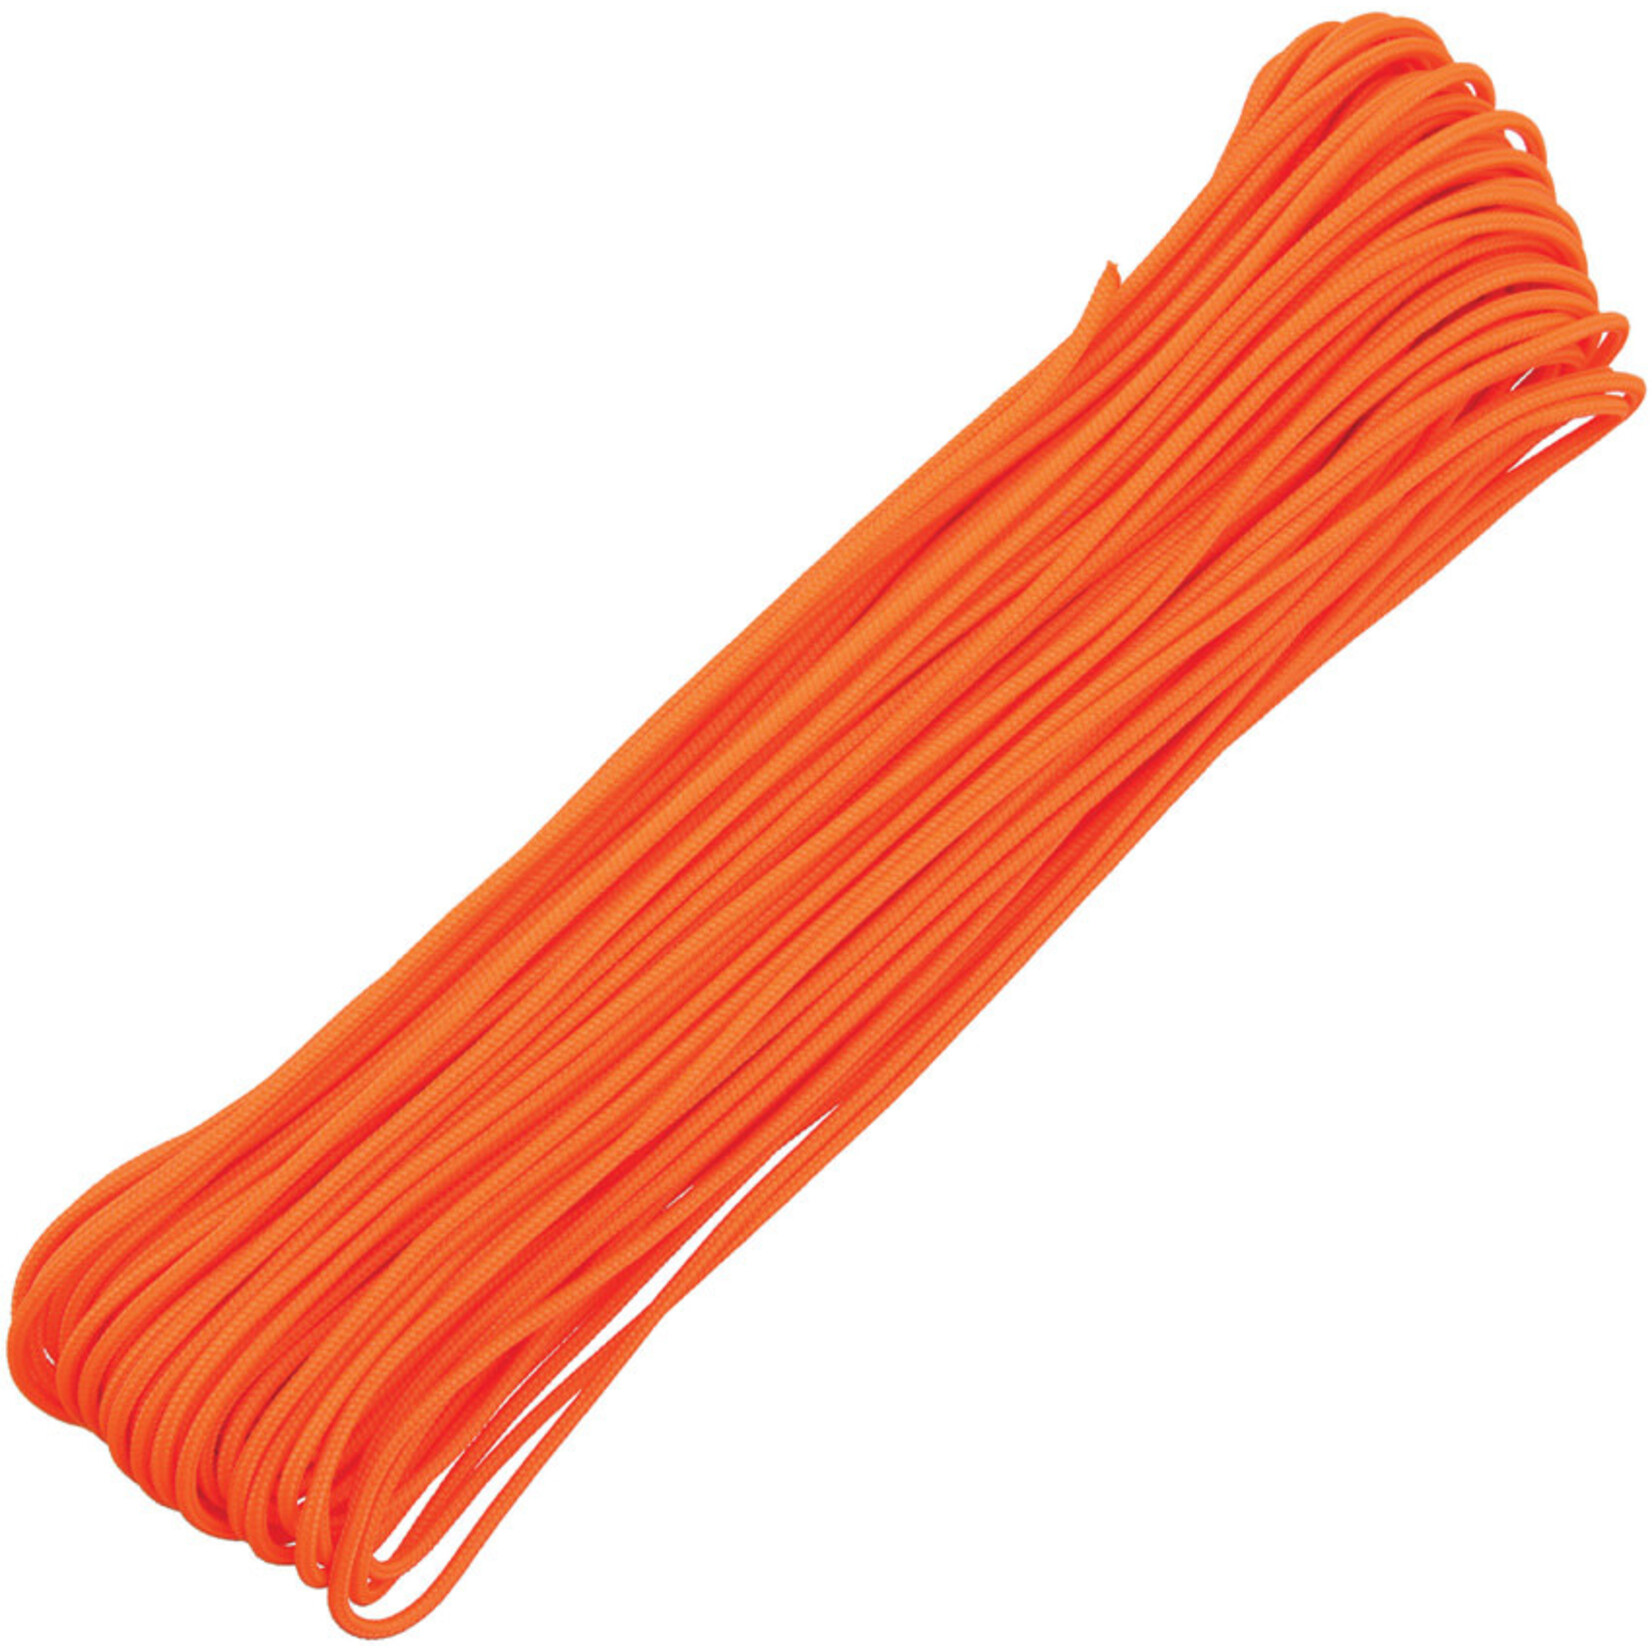 Atwood Rope Atwood 275 Cord 100ft Hank - 3/32" (2.4mm)